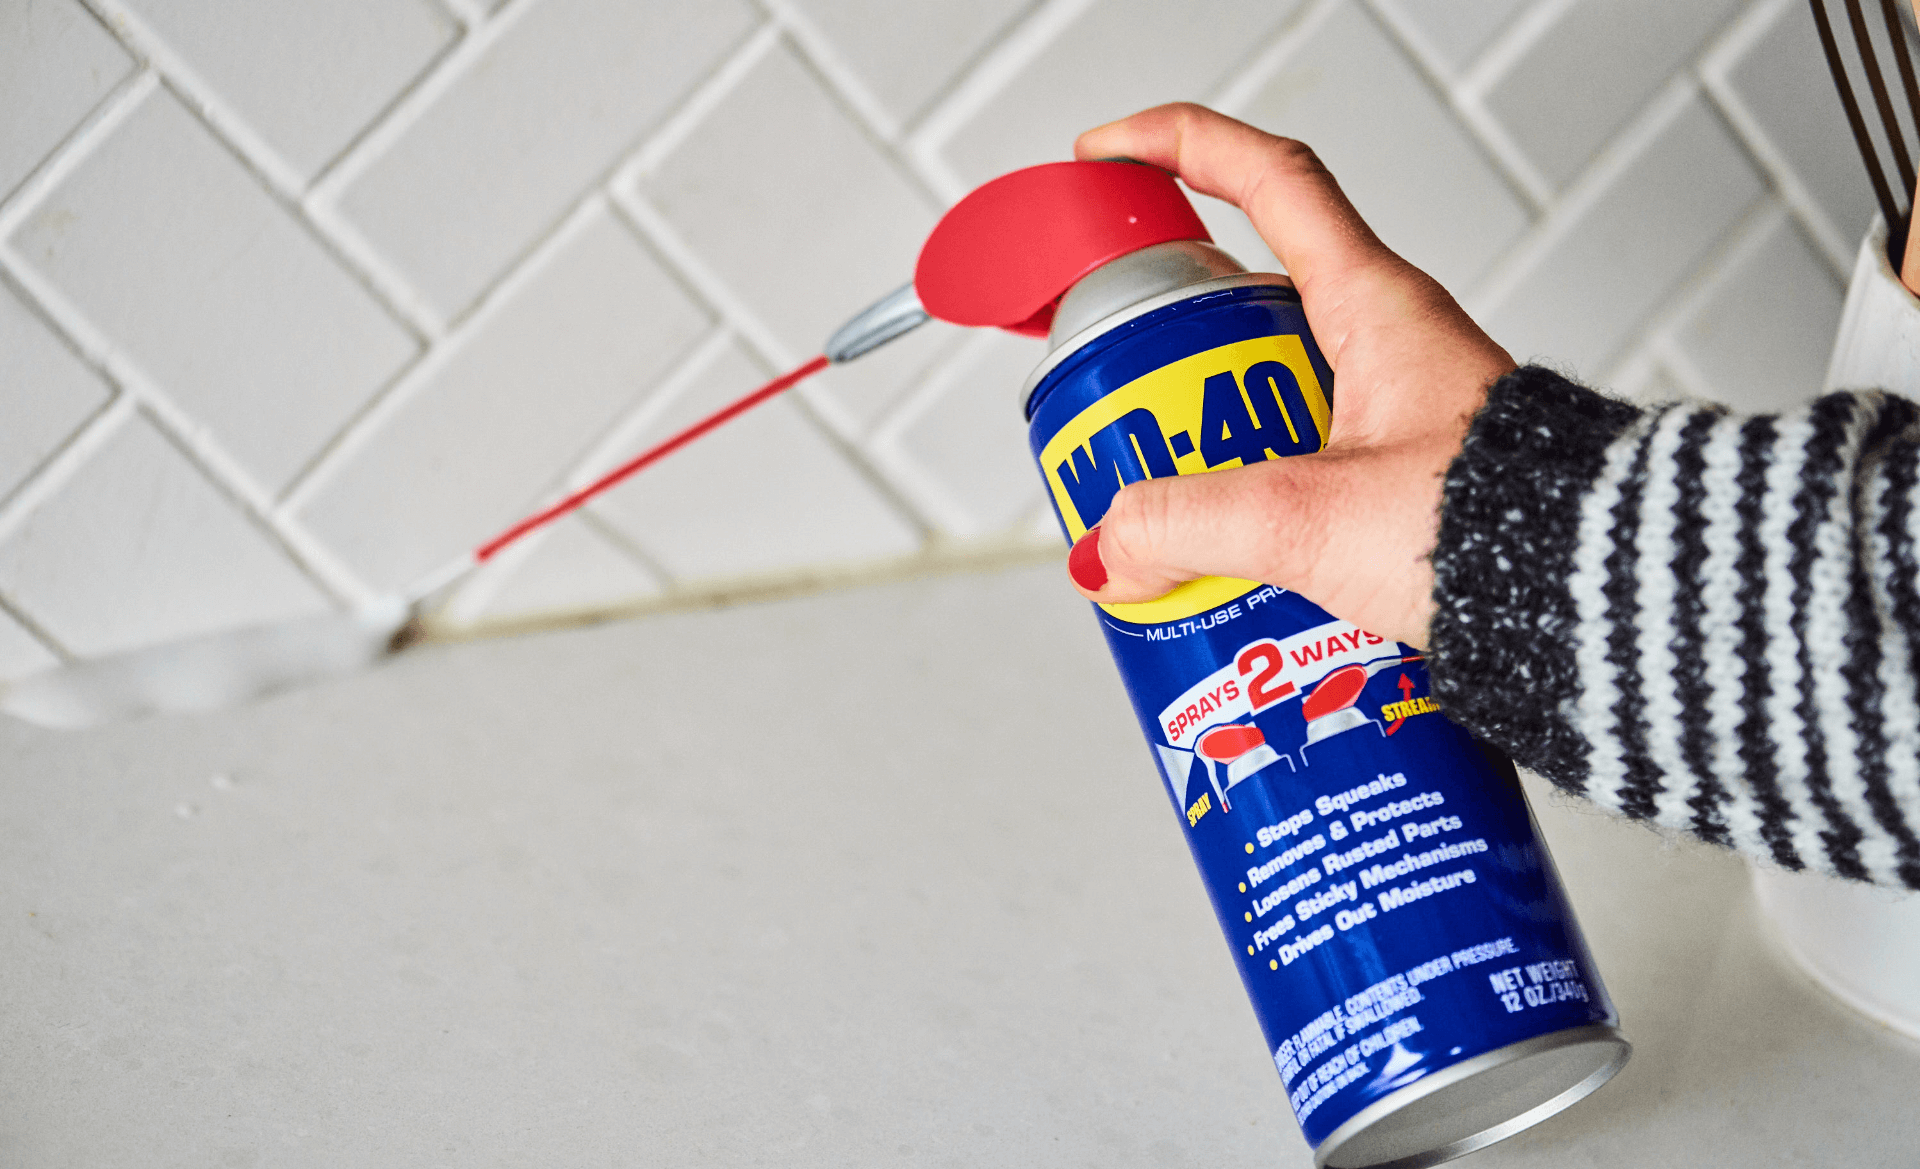 Is WD-40 Good for Cleaning?